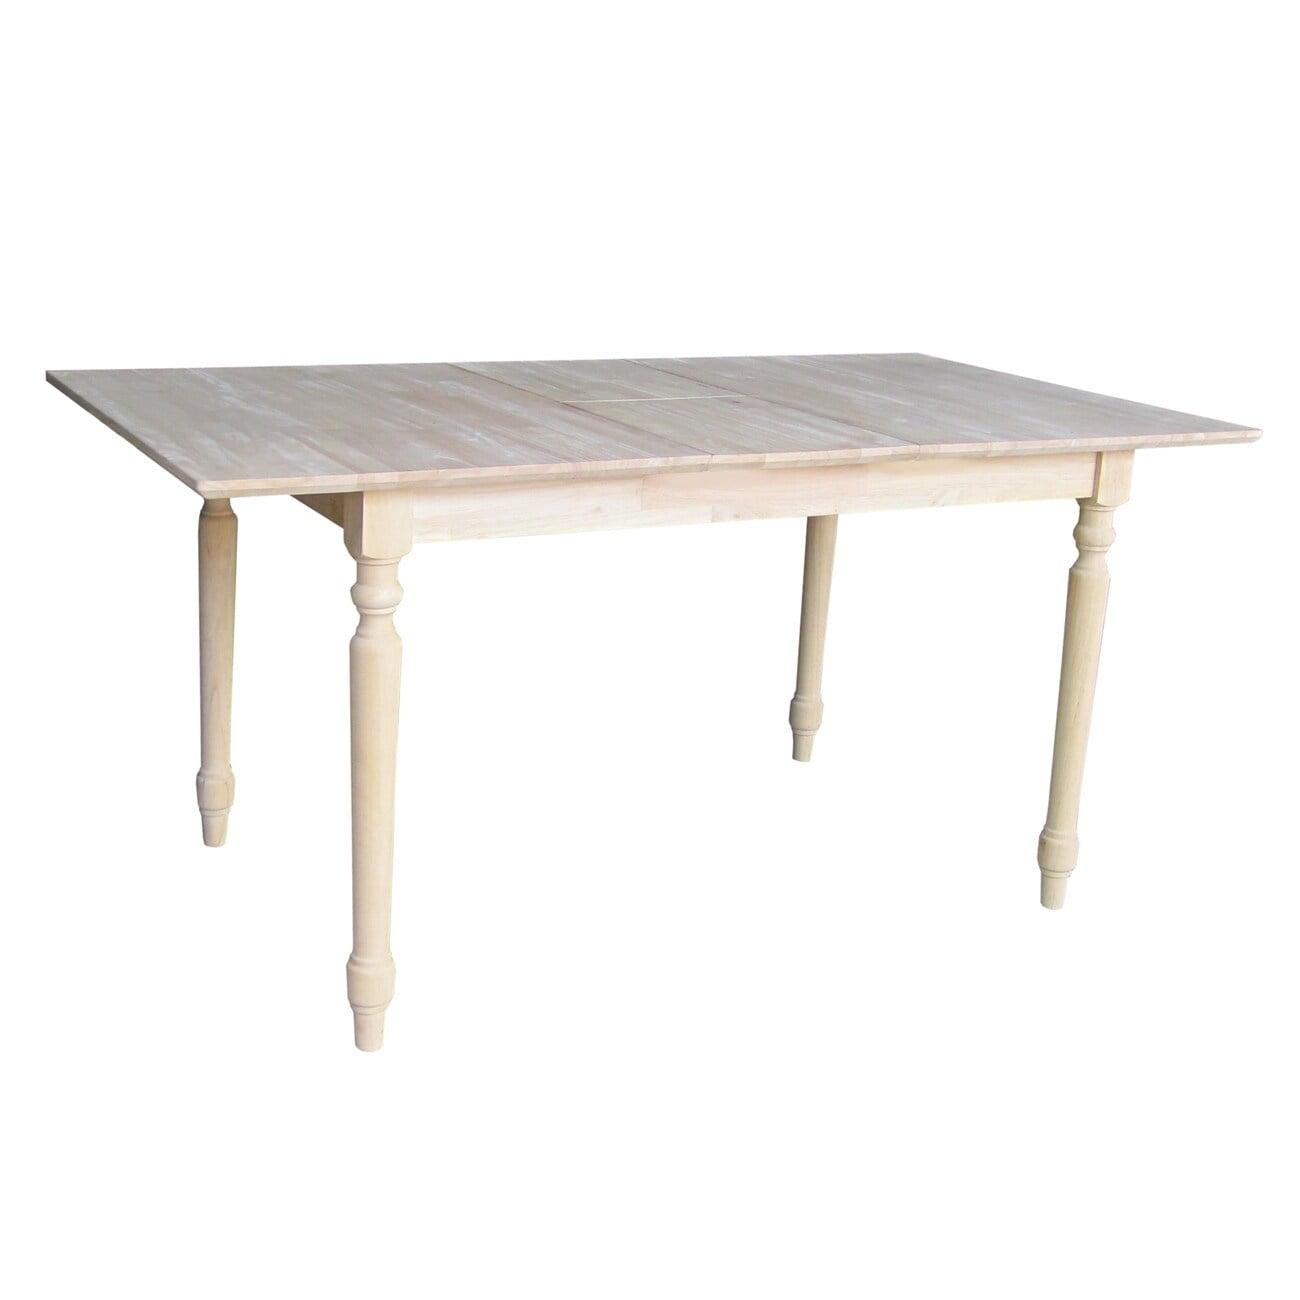 Elegant French Country Style Extendable Dining Table in Unfinished Wood